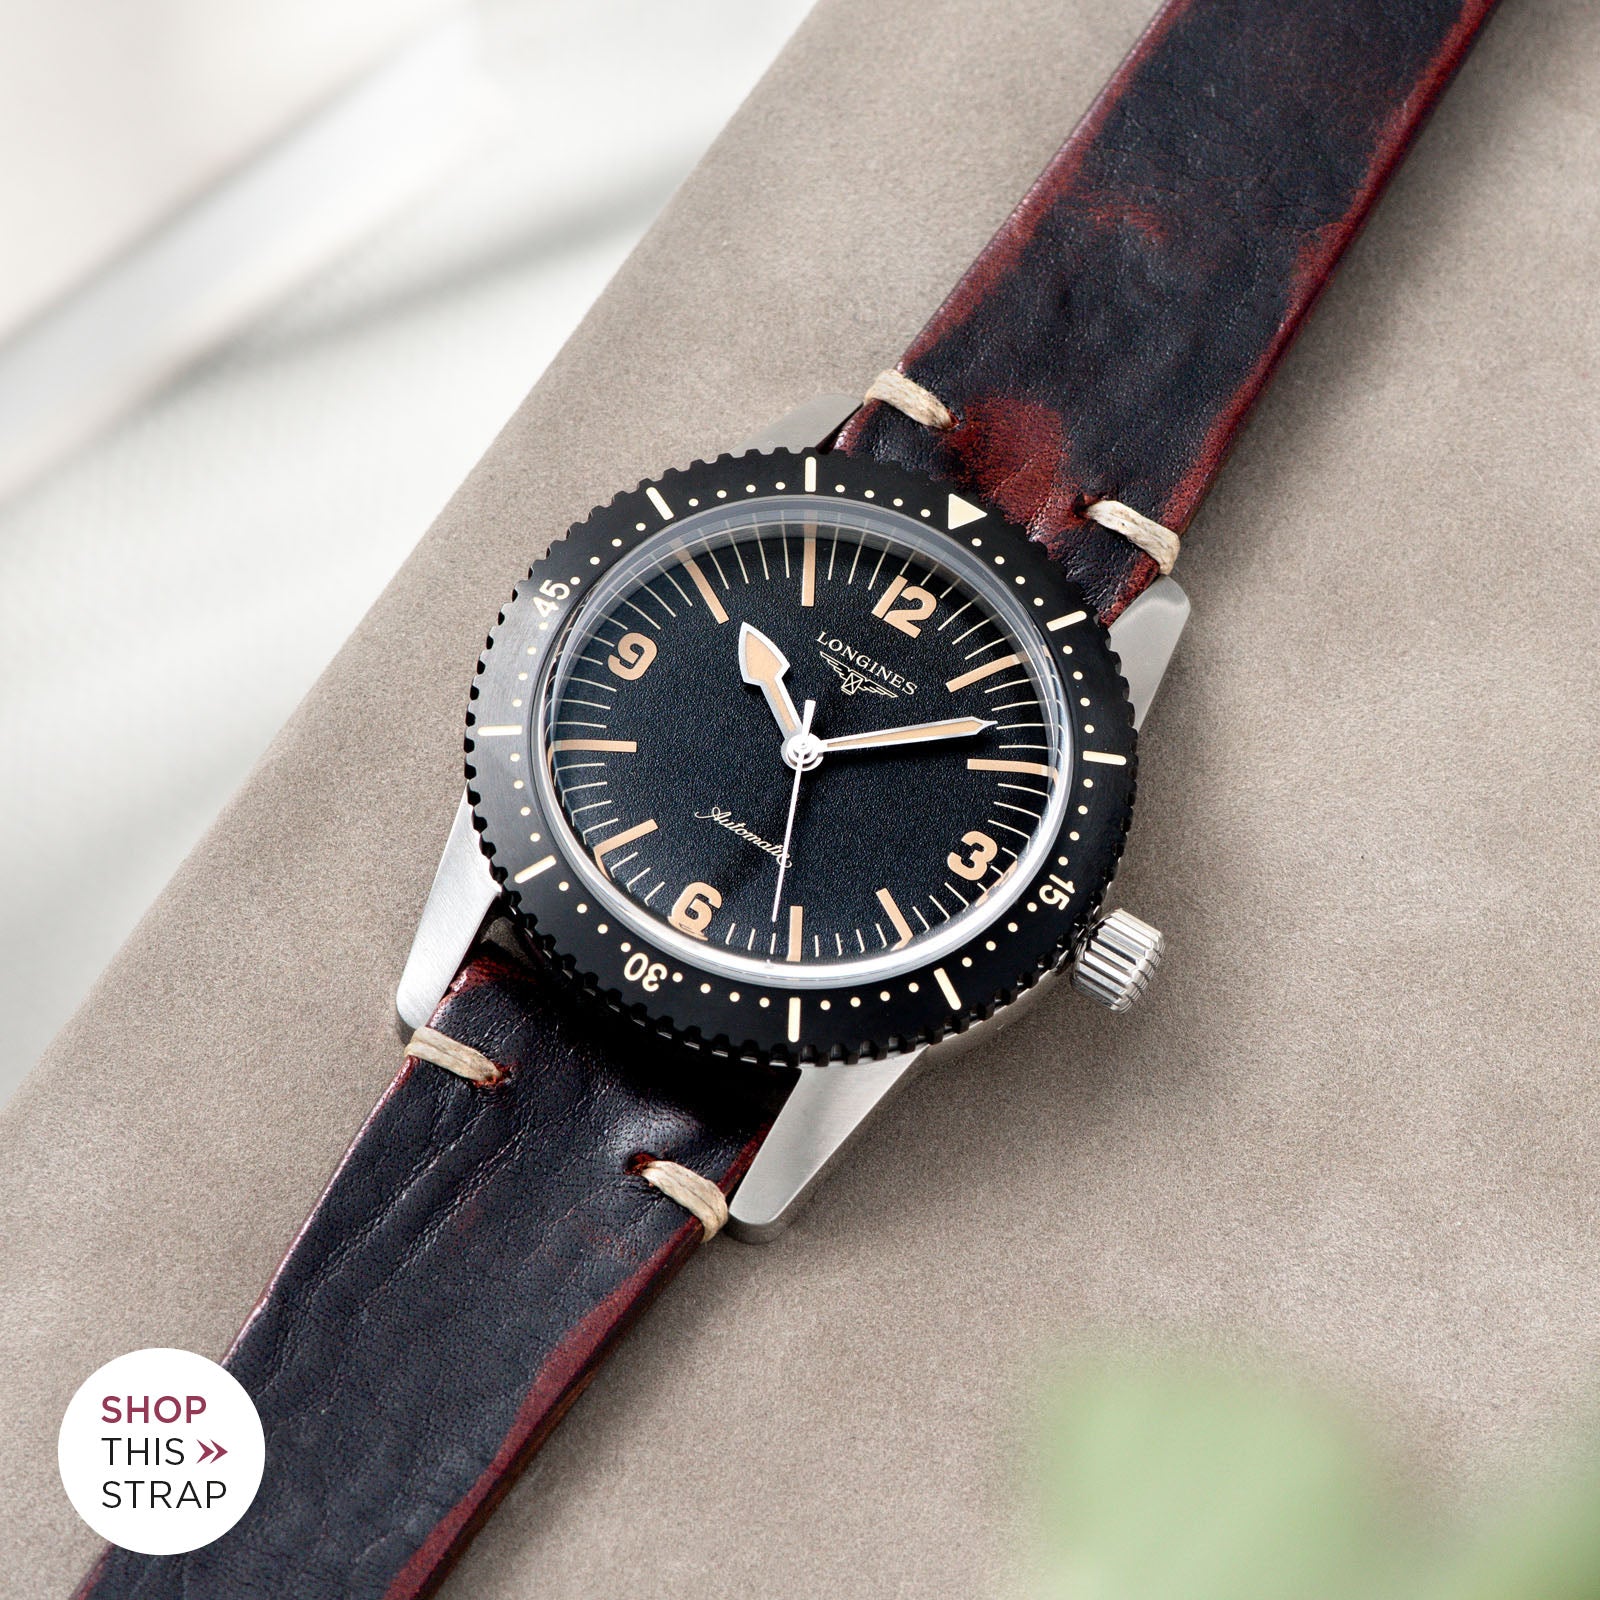 Bulang and Sons_Strap Guide_Longines Skin Diver__Diablo Black Leather Watch Strap